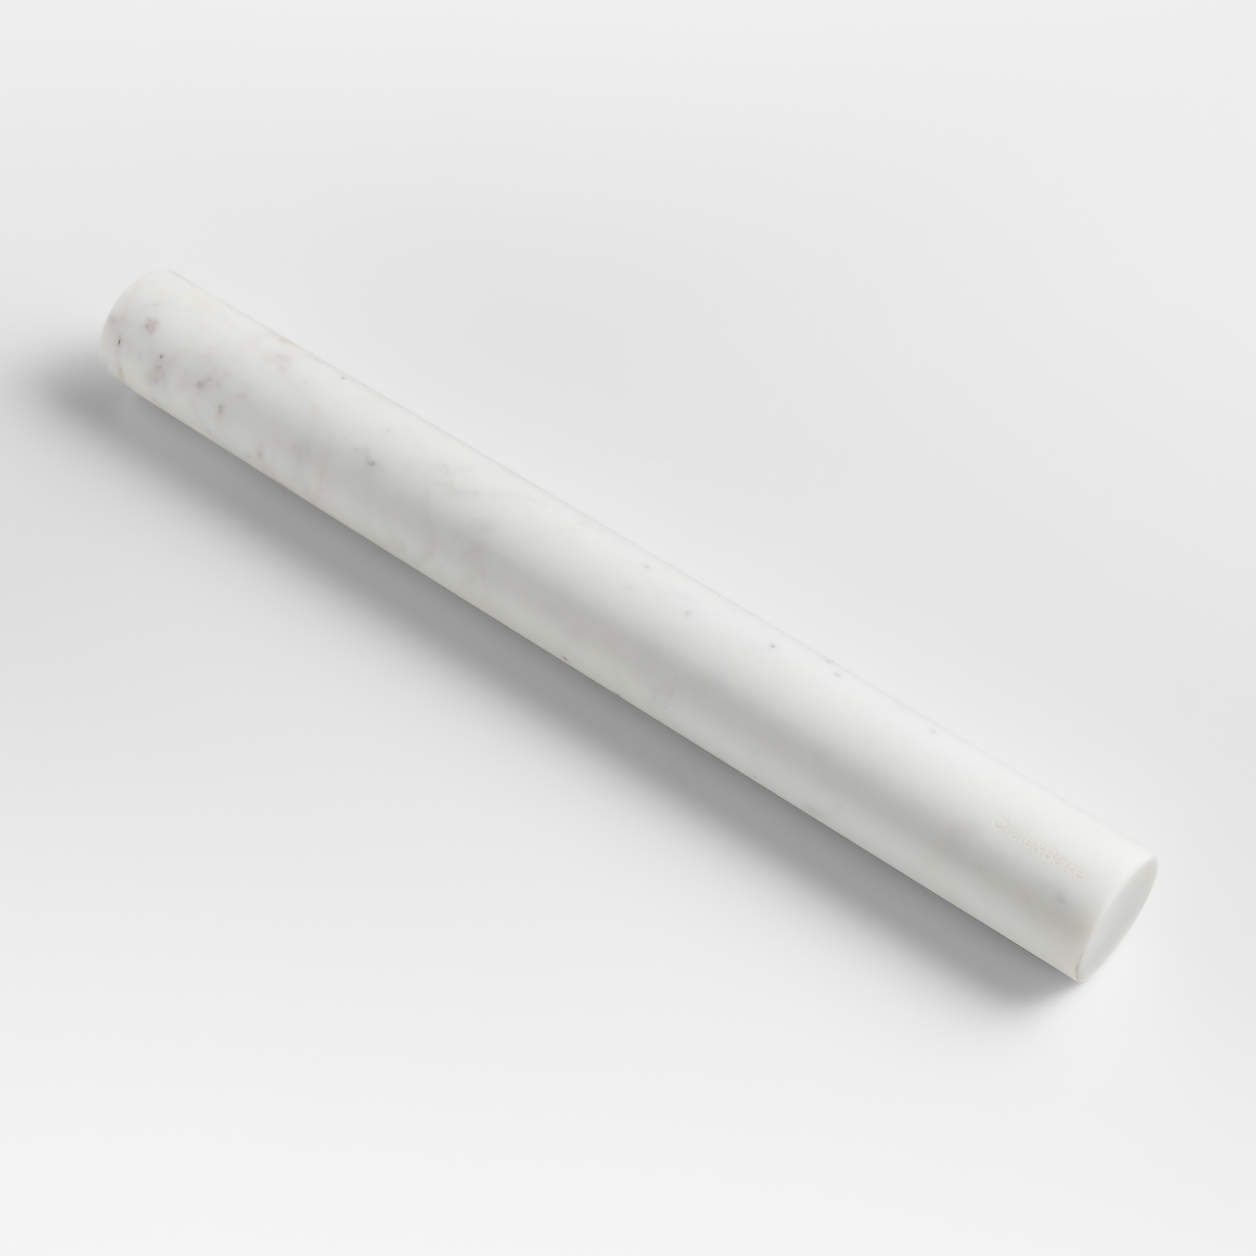 Crate & Barrel White Marble Straight Rolling Pin | Crate & Barrel